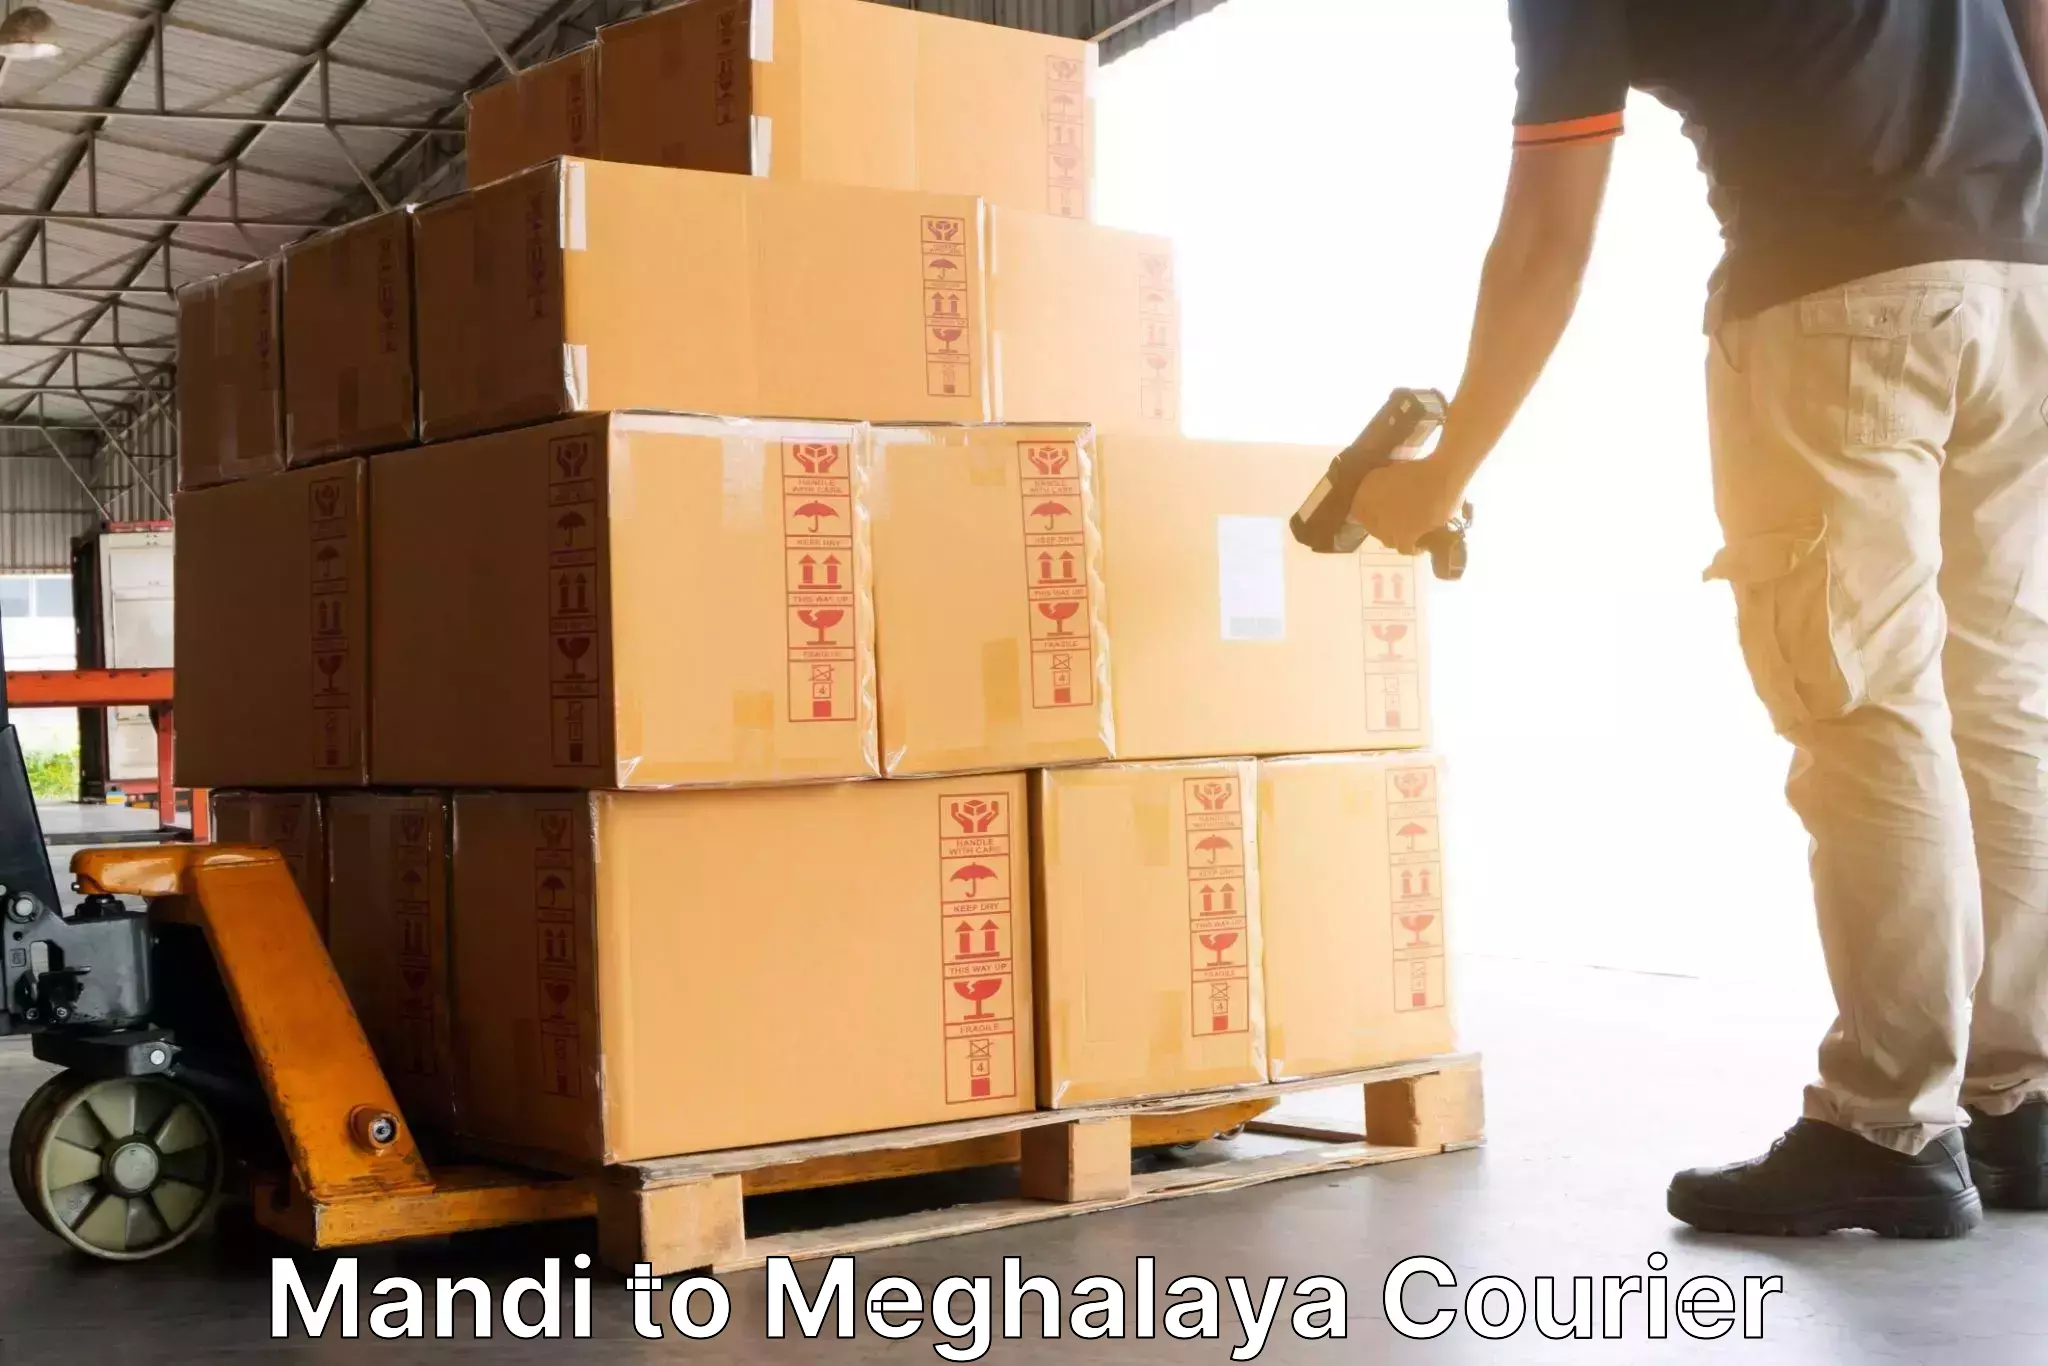 24-hour courier services Mandi to Shillong